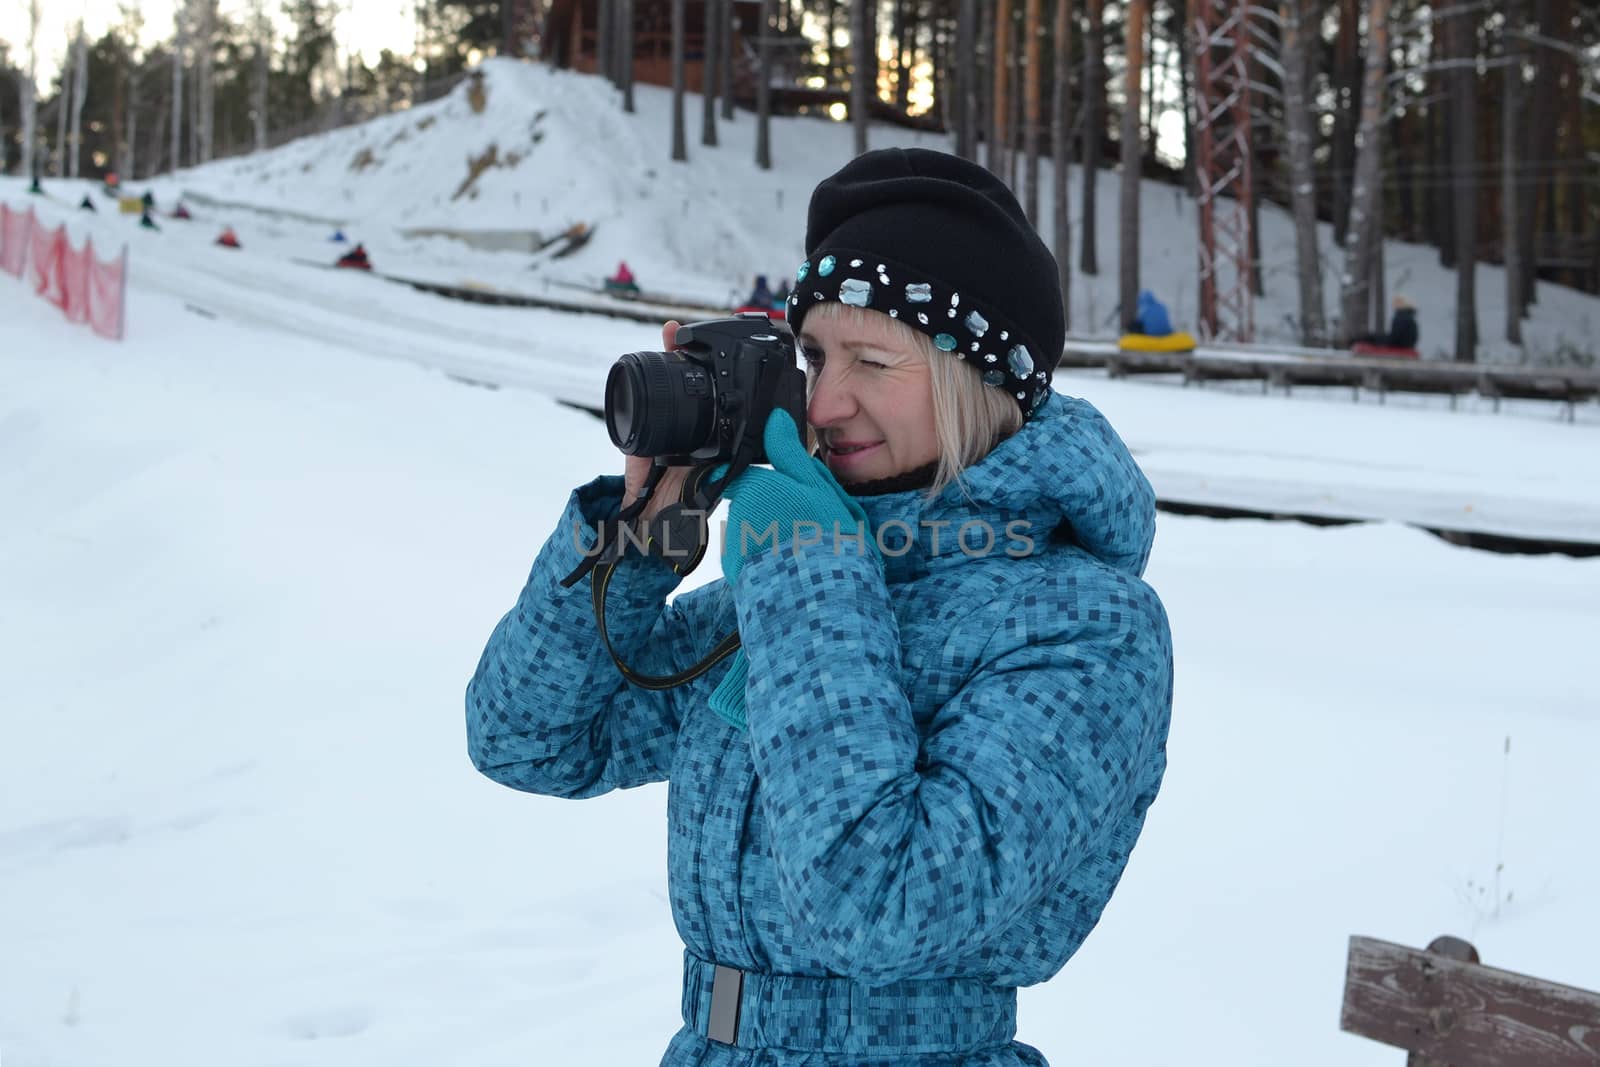 The woman in winter clothes photographs the SLR camera. by veronka72